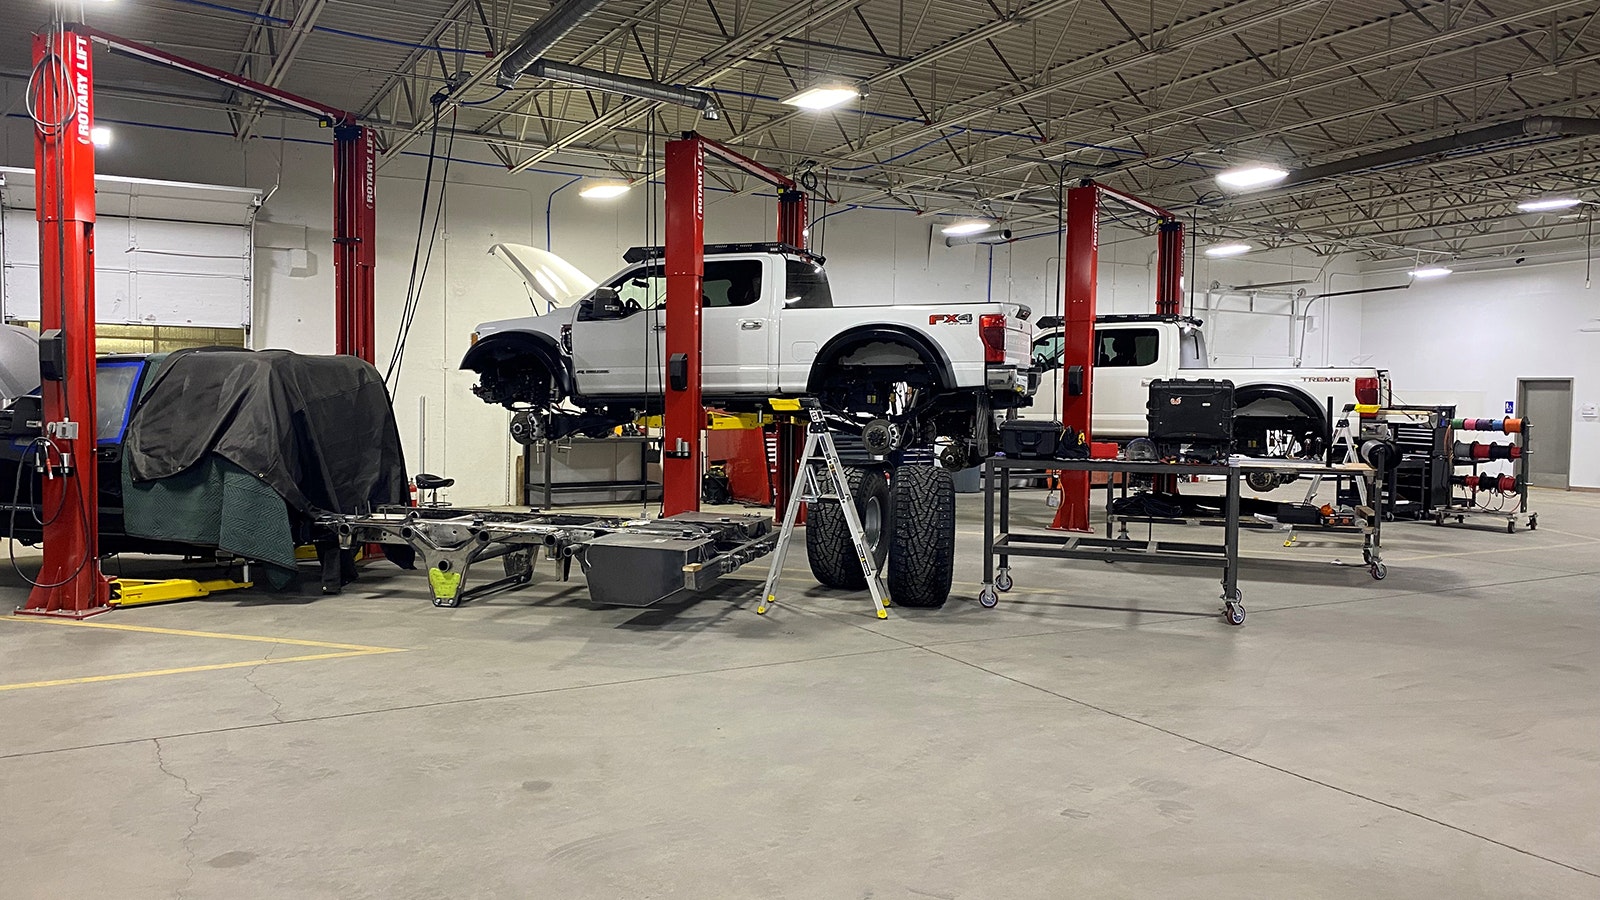 The Arctic Trucks North America shop in Cheyenne customizes trucks for extreme driving over snow and ice.